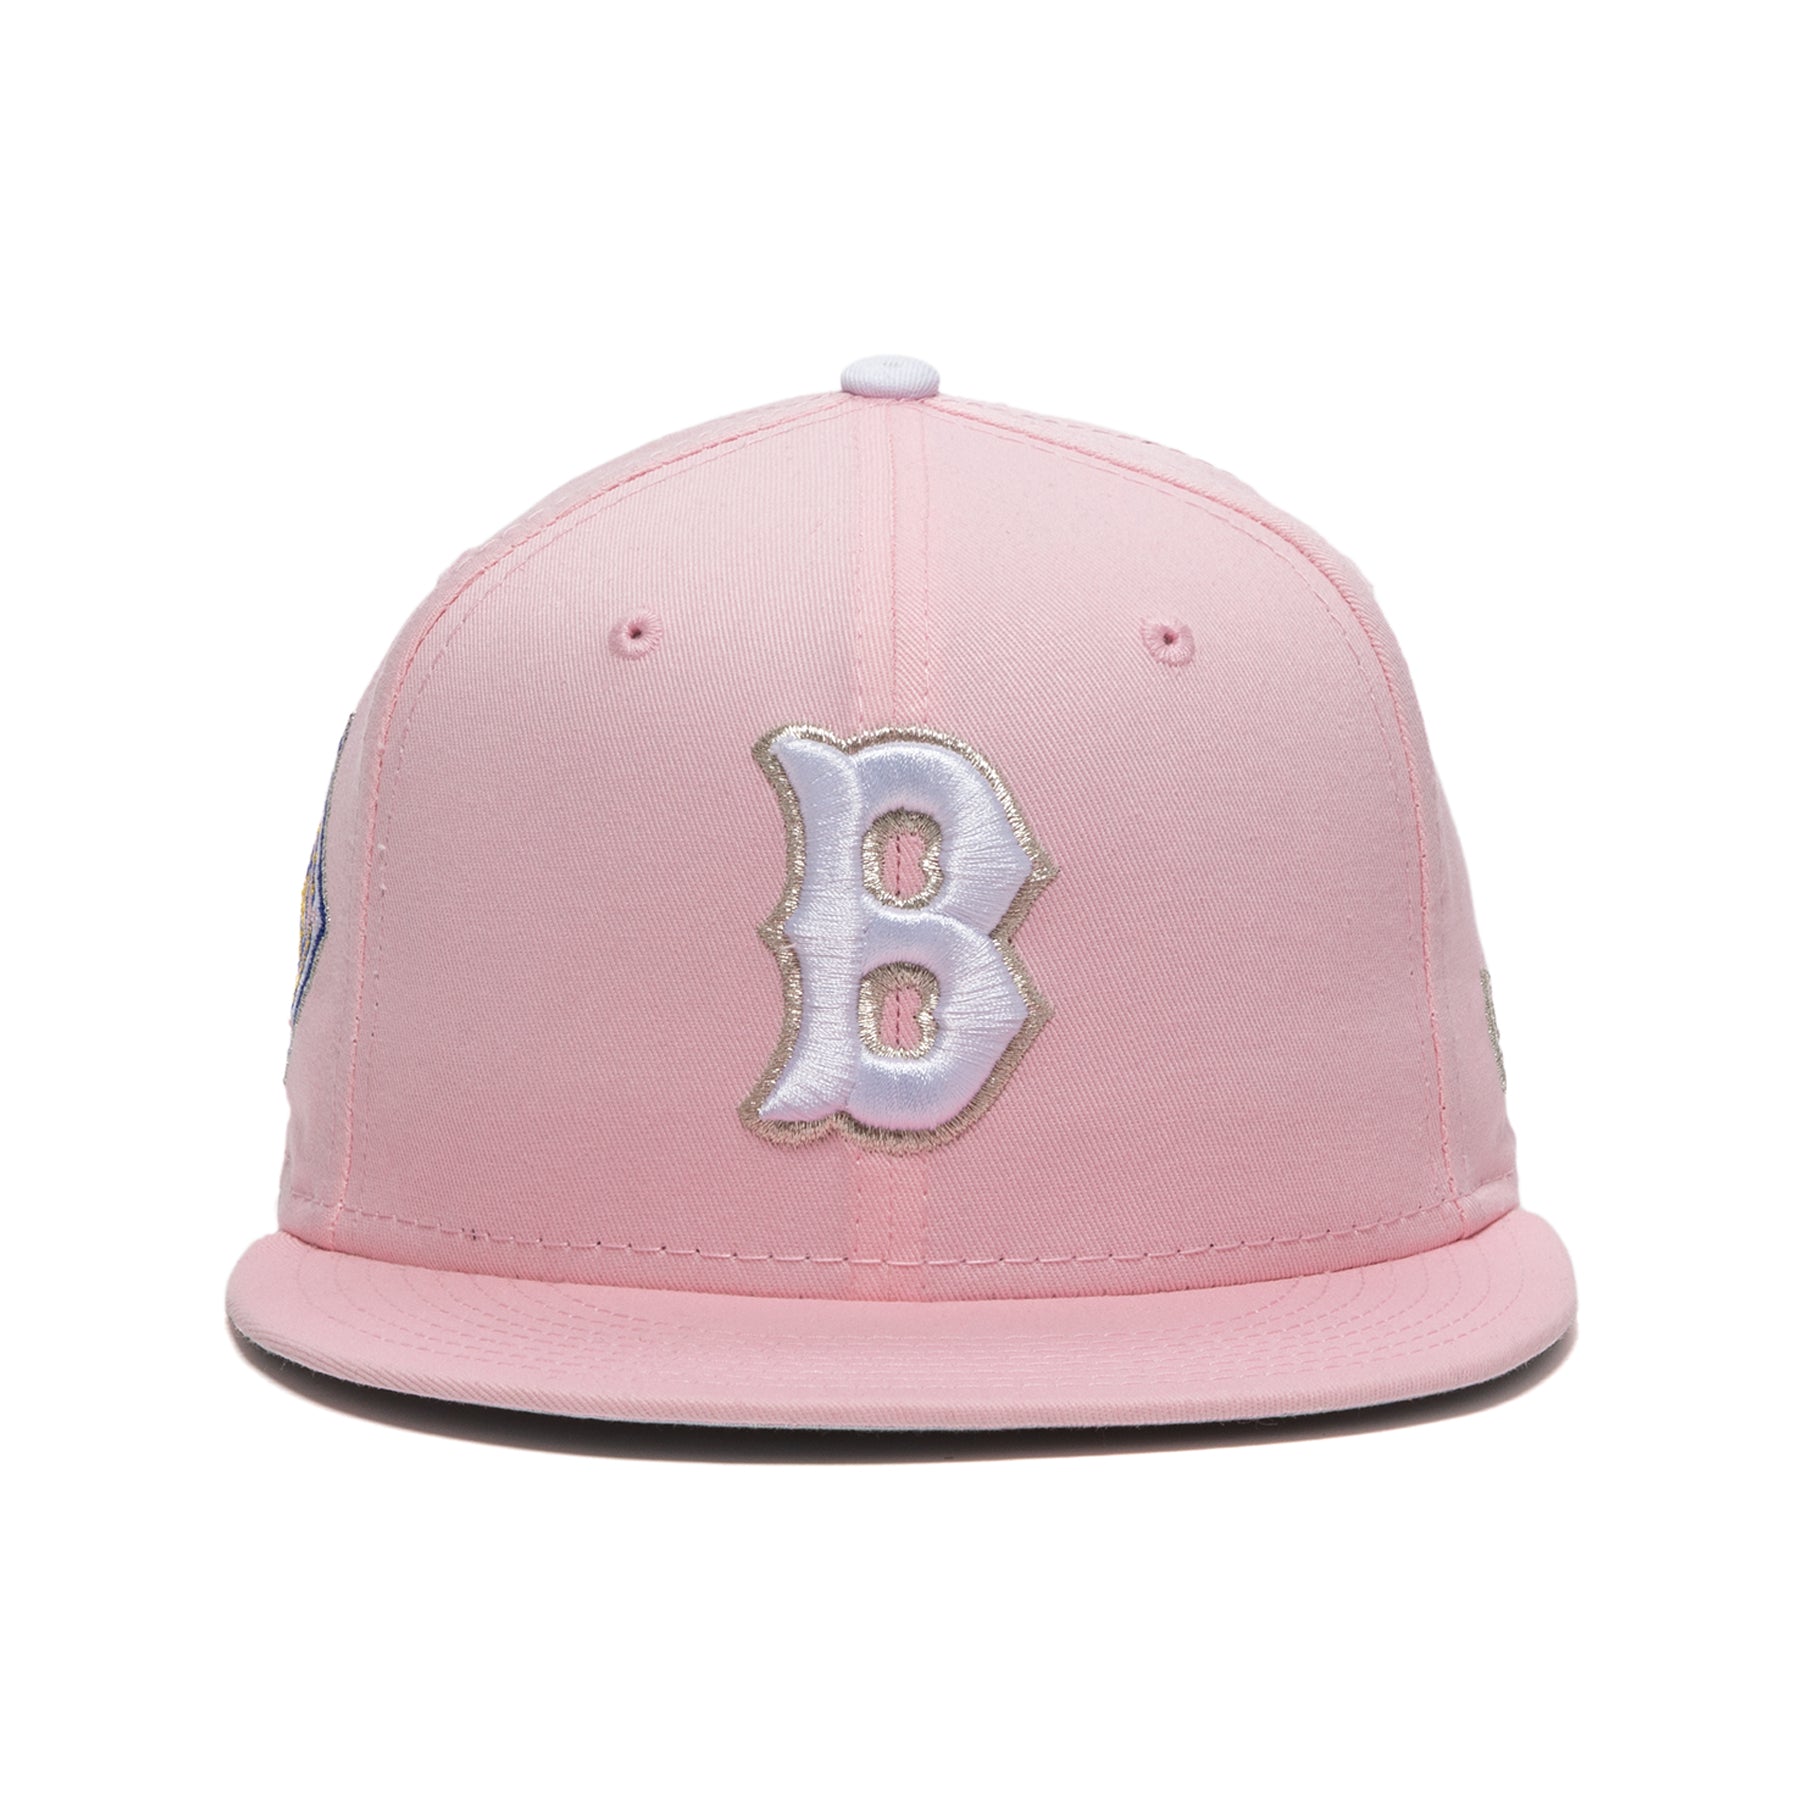 Tom Audreath Reusachtig convergentie Concepts x New Era 5950 Boston Red Sox Fitted Hat (Cotton Pink)